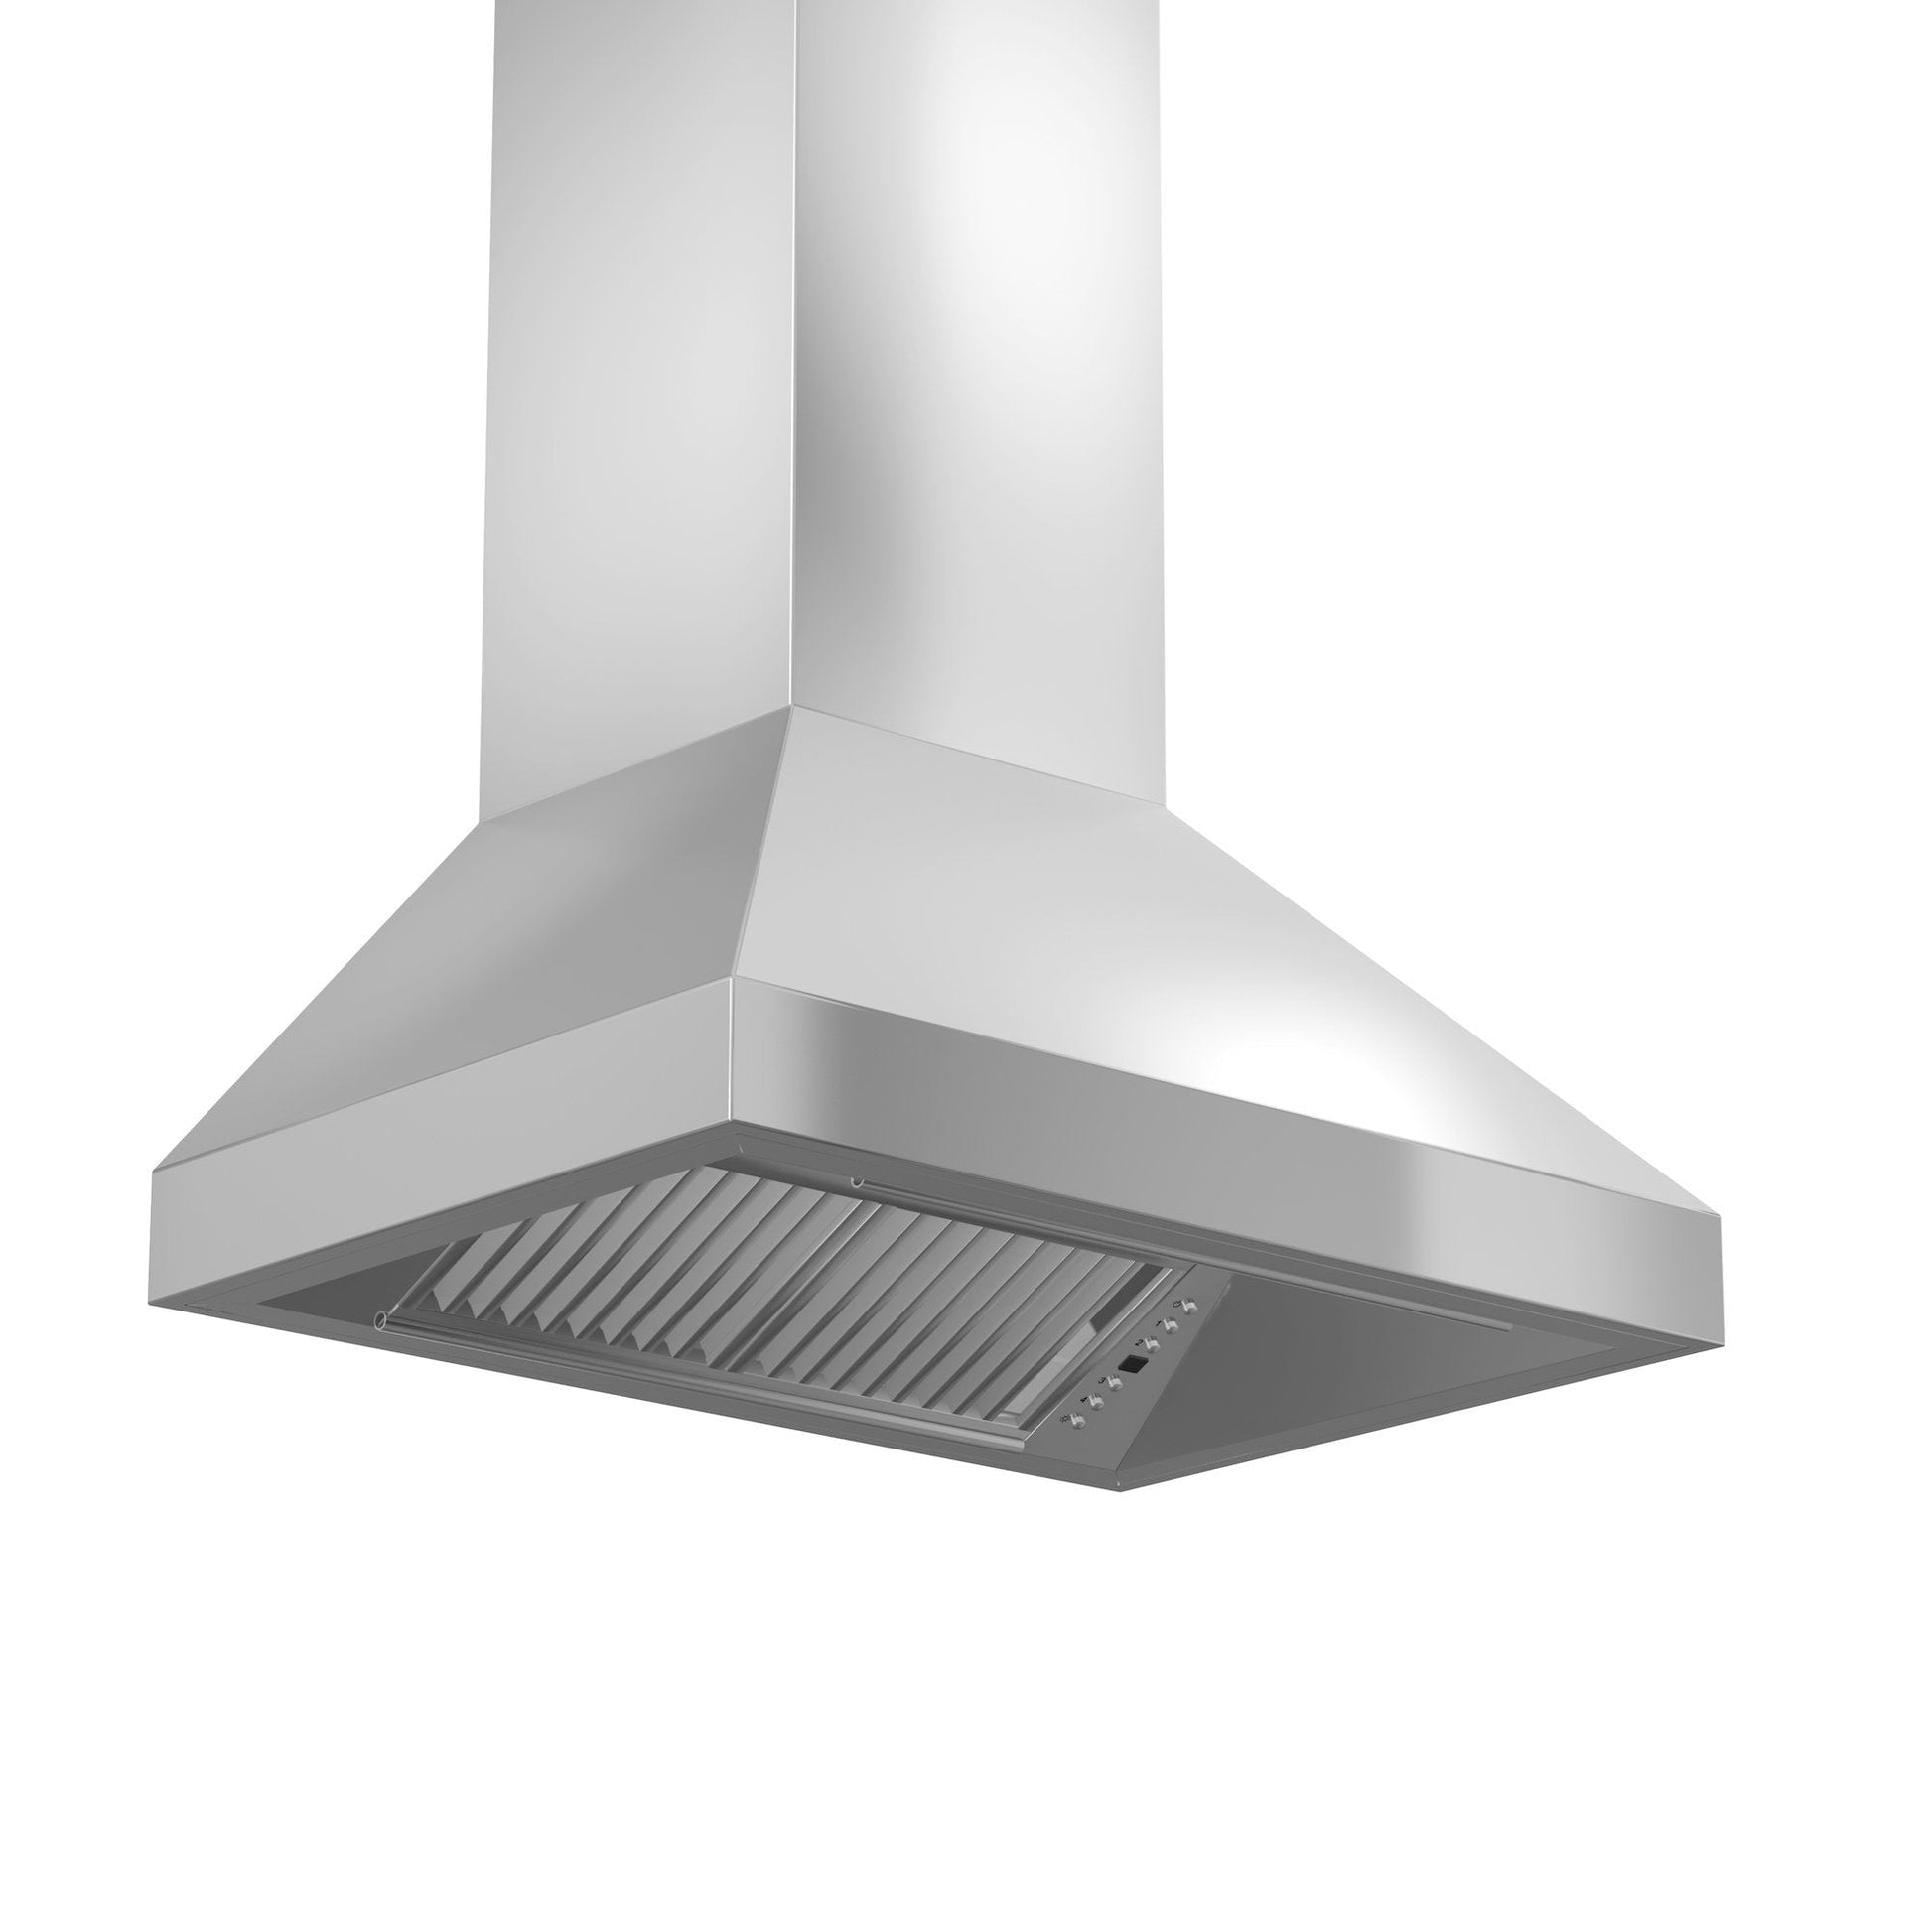 ZLINE Professional Convertible Vent Wall Mount Range Hood in Stainless Steel (597) Side Under View